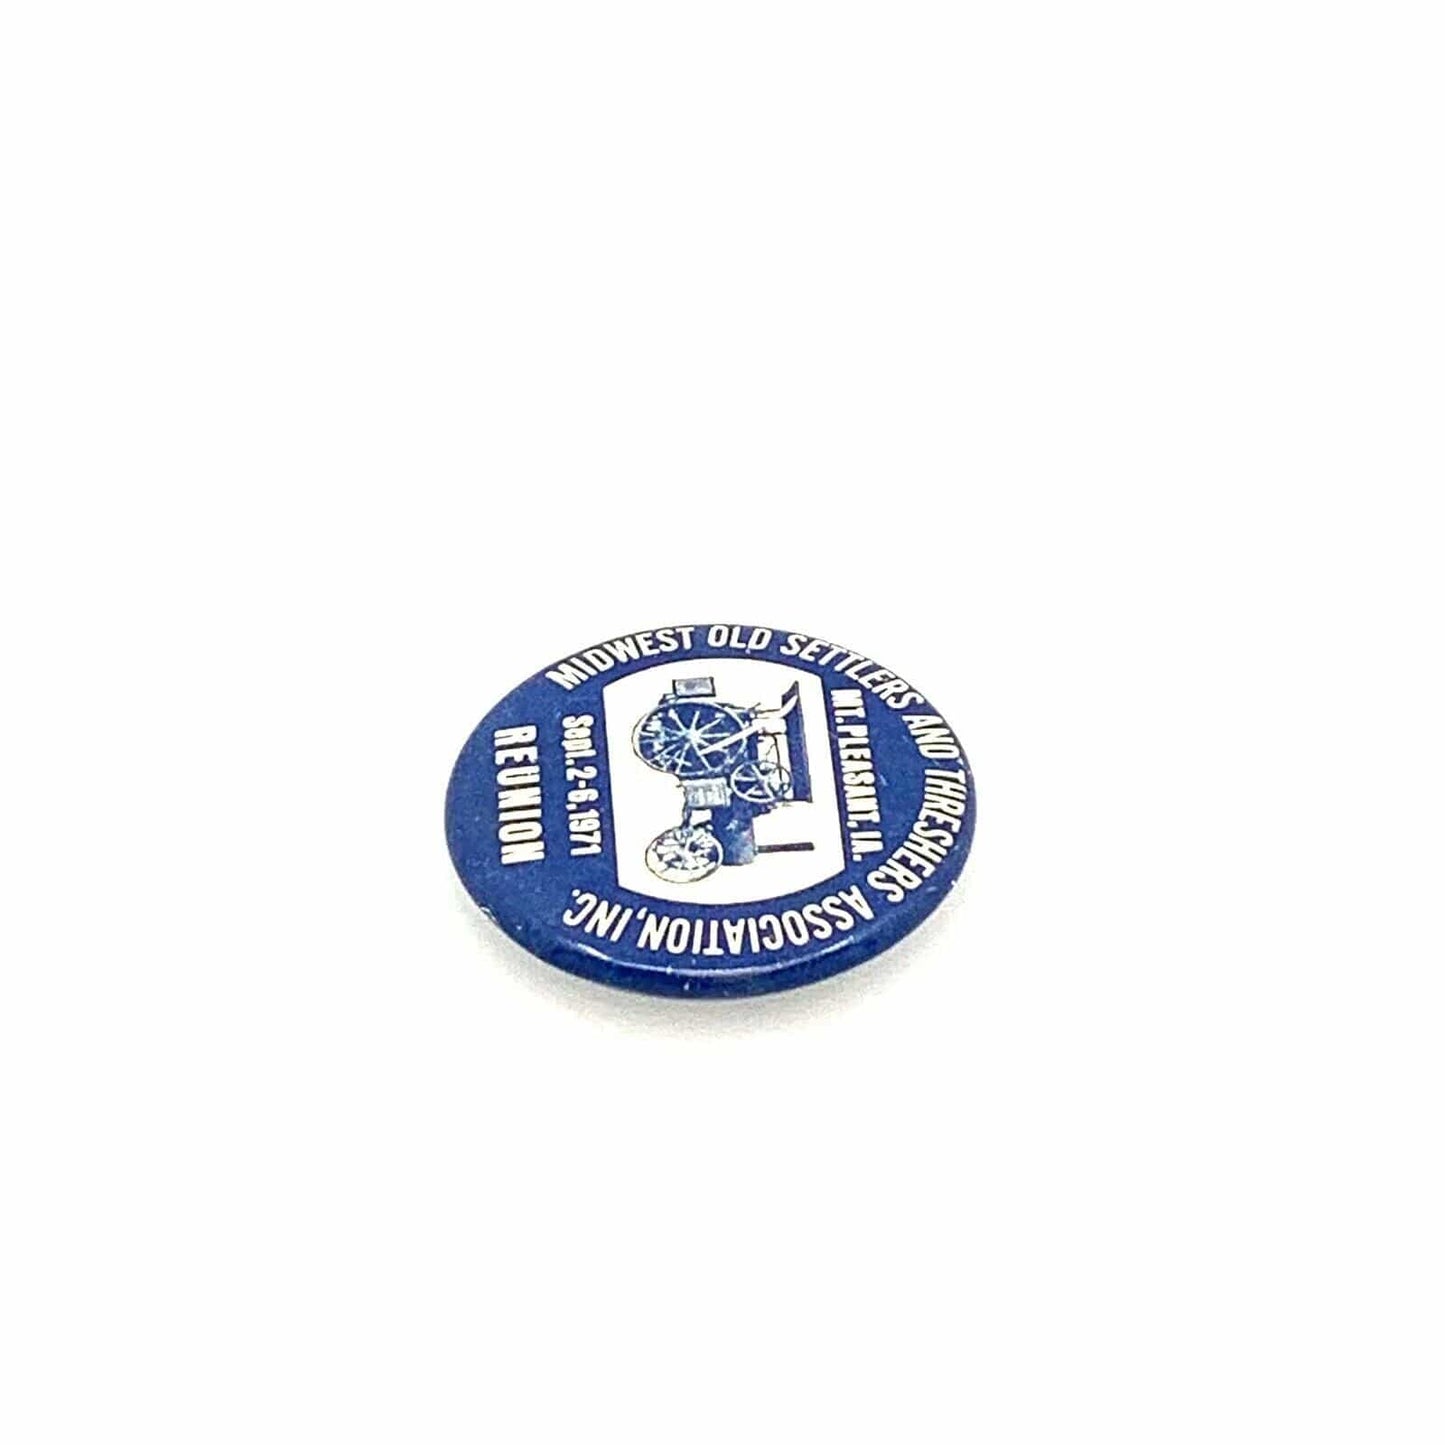 Vintage 1971 Midwest Old Settlers Threshers Assoc. Reunion Button Pin Pinback, Blue